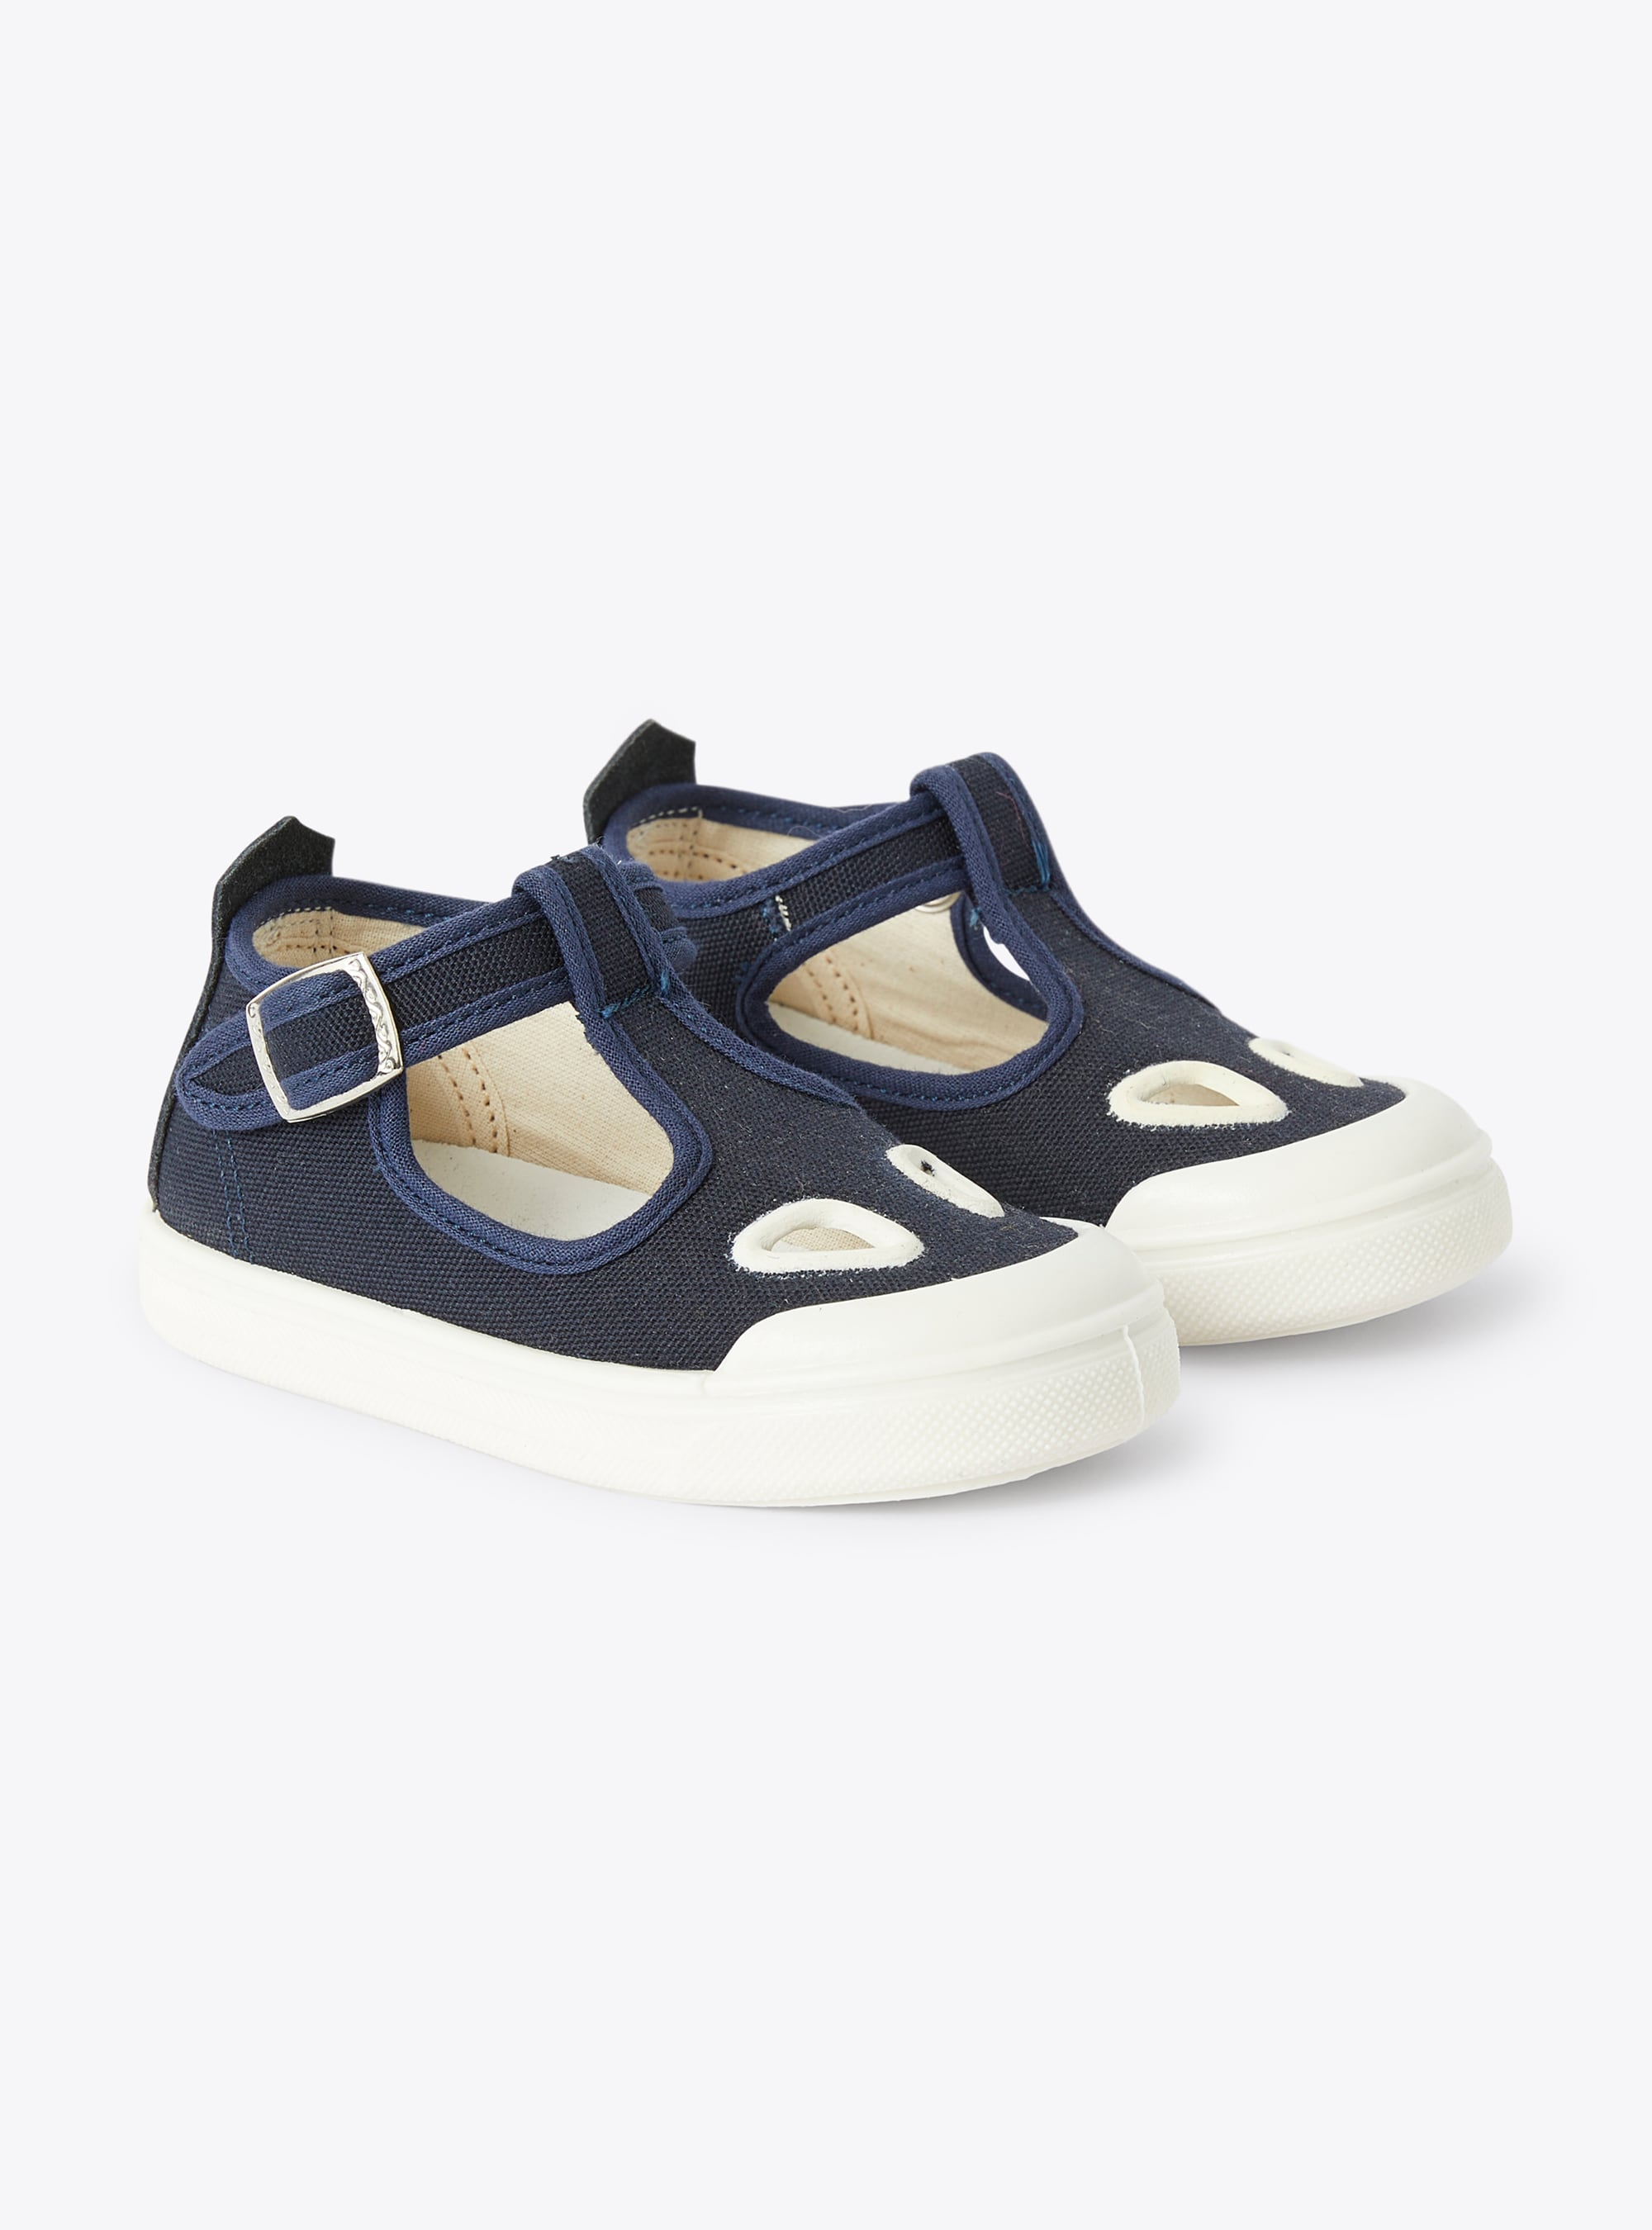 Sandal in blue canvas with a t-bar design and decorative holes - Shoes - Il Gufo